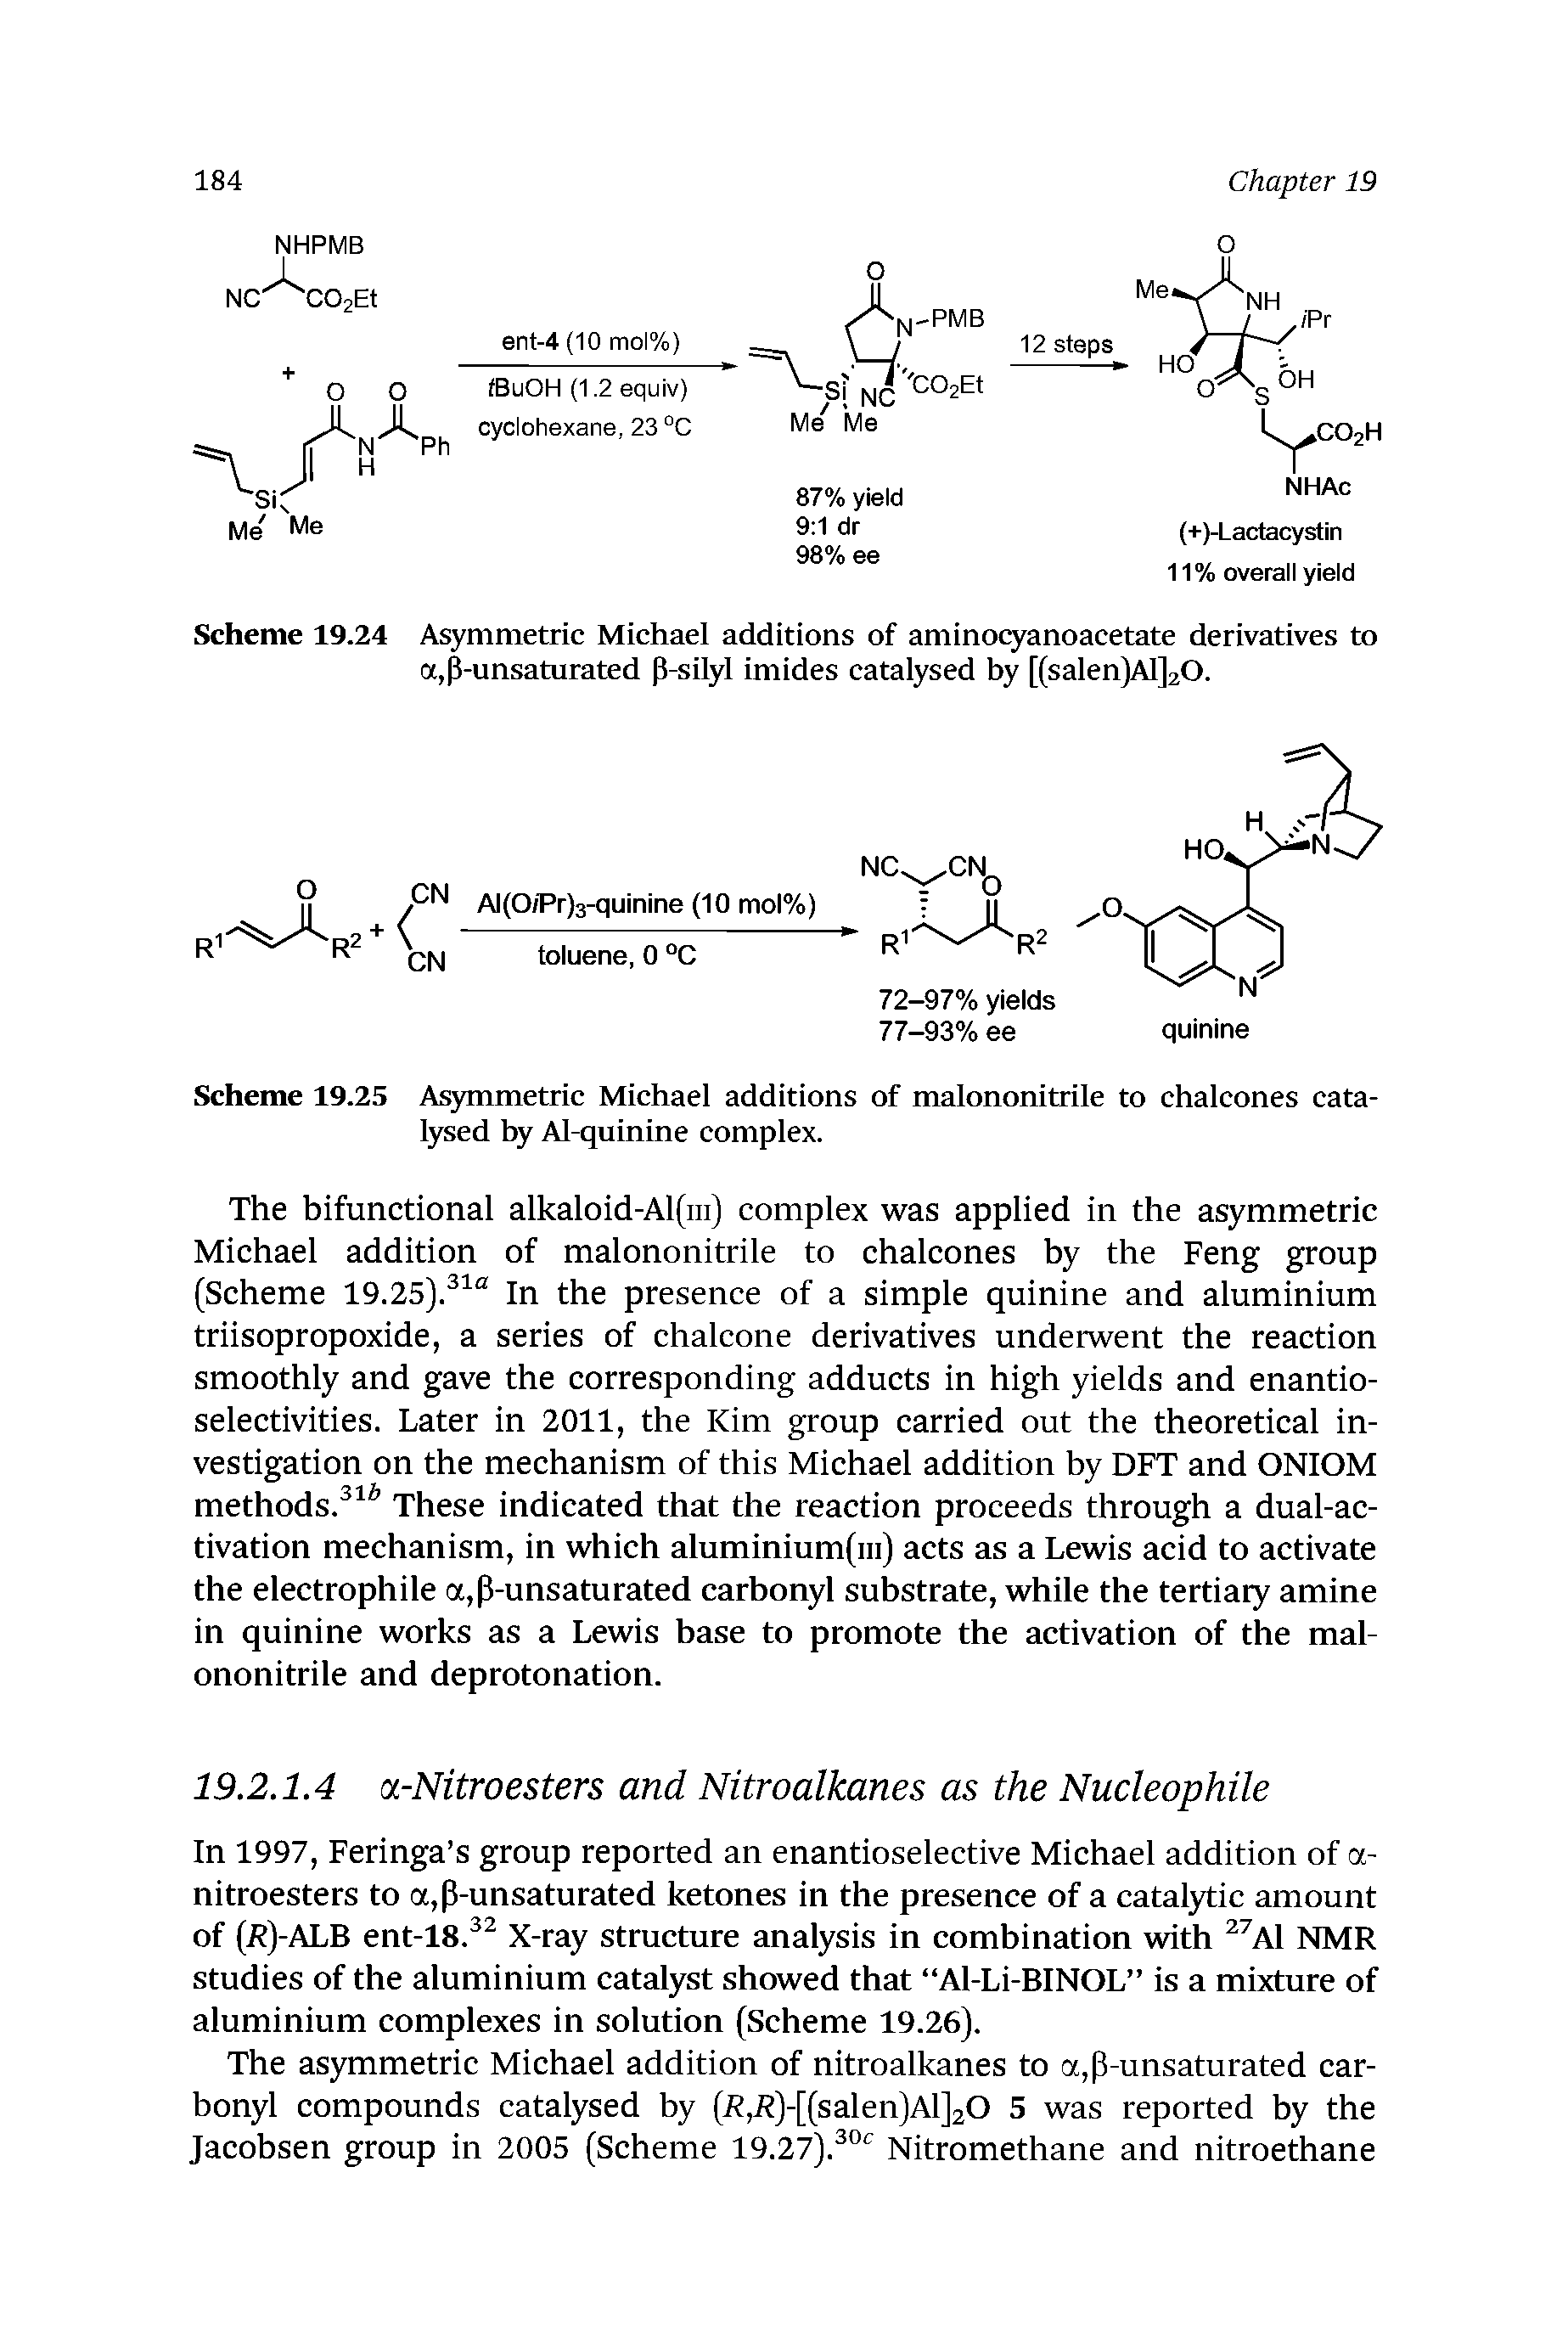 Scheme 19.24 Asymmetric Michael additions of aminotyanoacetate derivatives to a,p-unsaturated p-silyl imides catalysed by [(salen)Al]20.